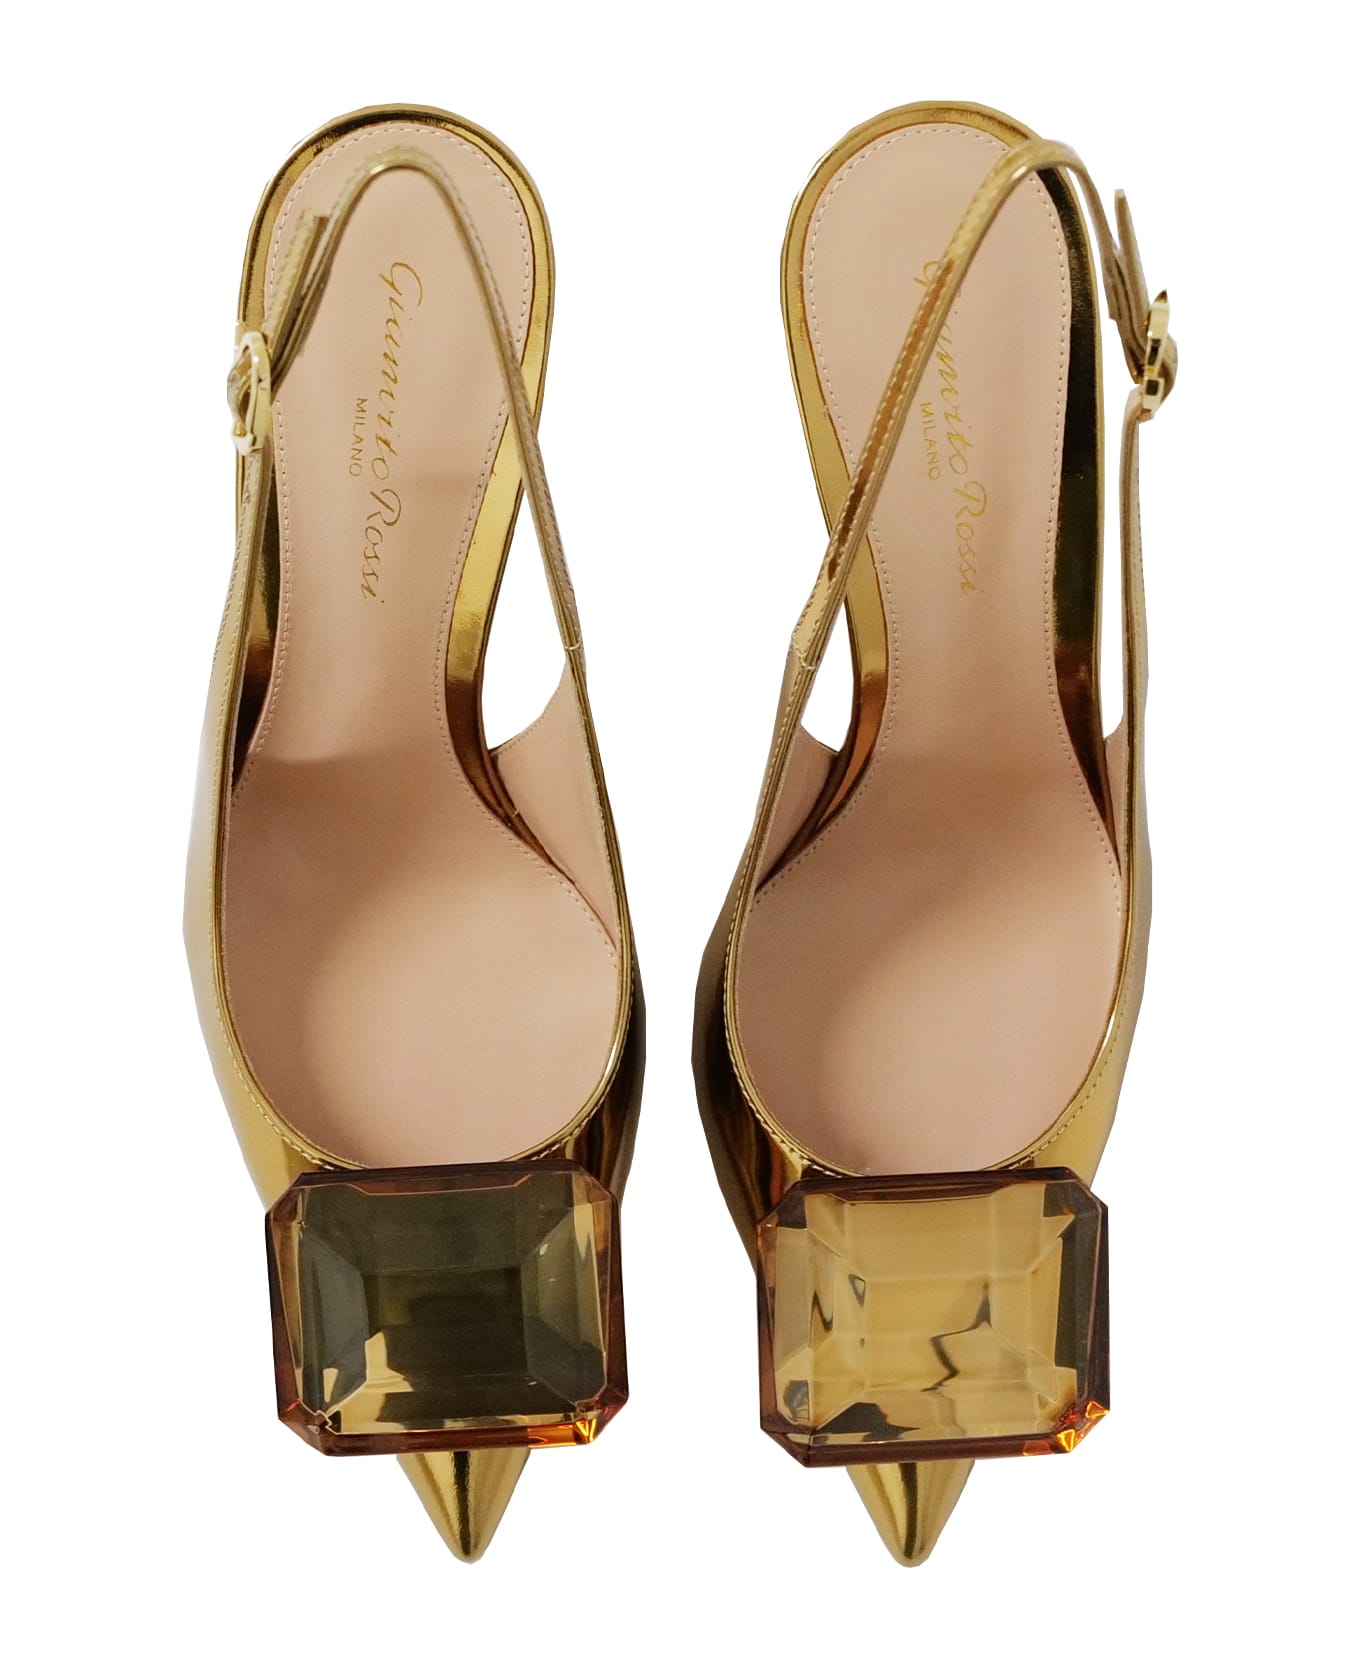 Gianvito Rossi ''jaipur Sling'' Shoes With Heels - Golden